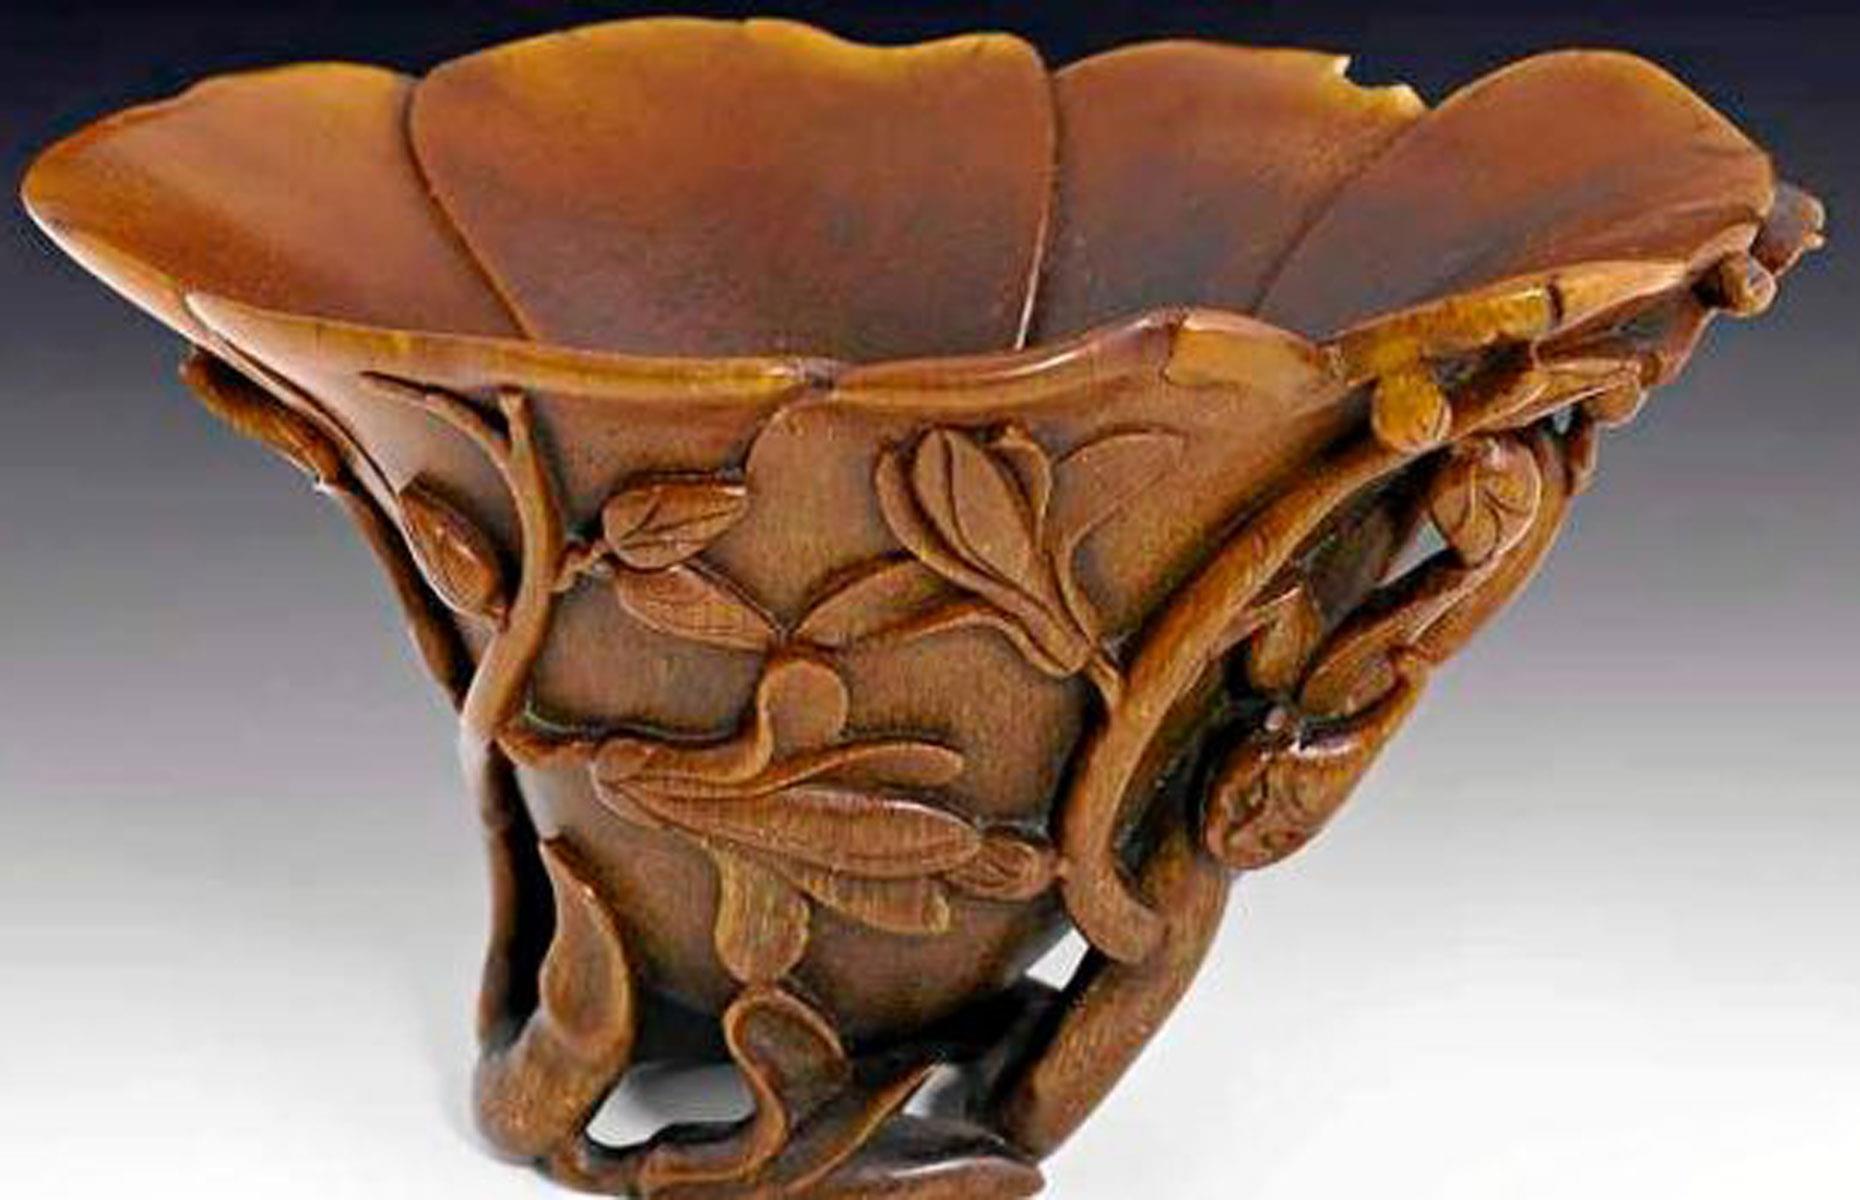 The 17th-century Chinese cup sold for $50,600 (£38.9k)